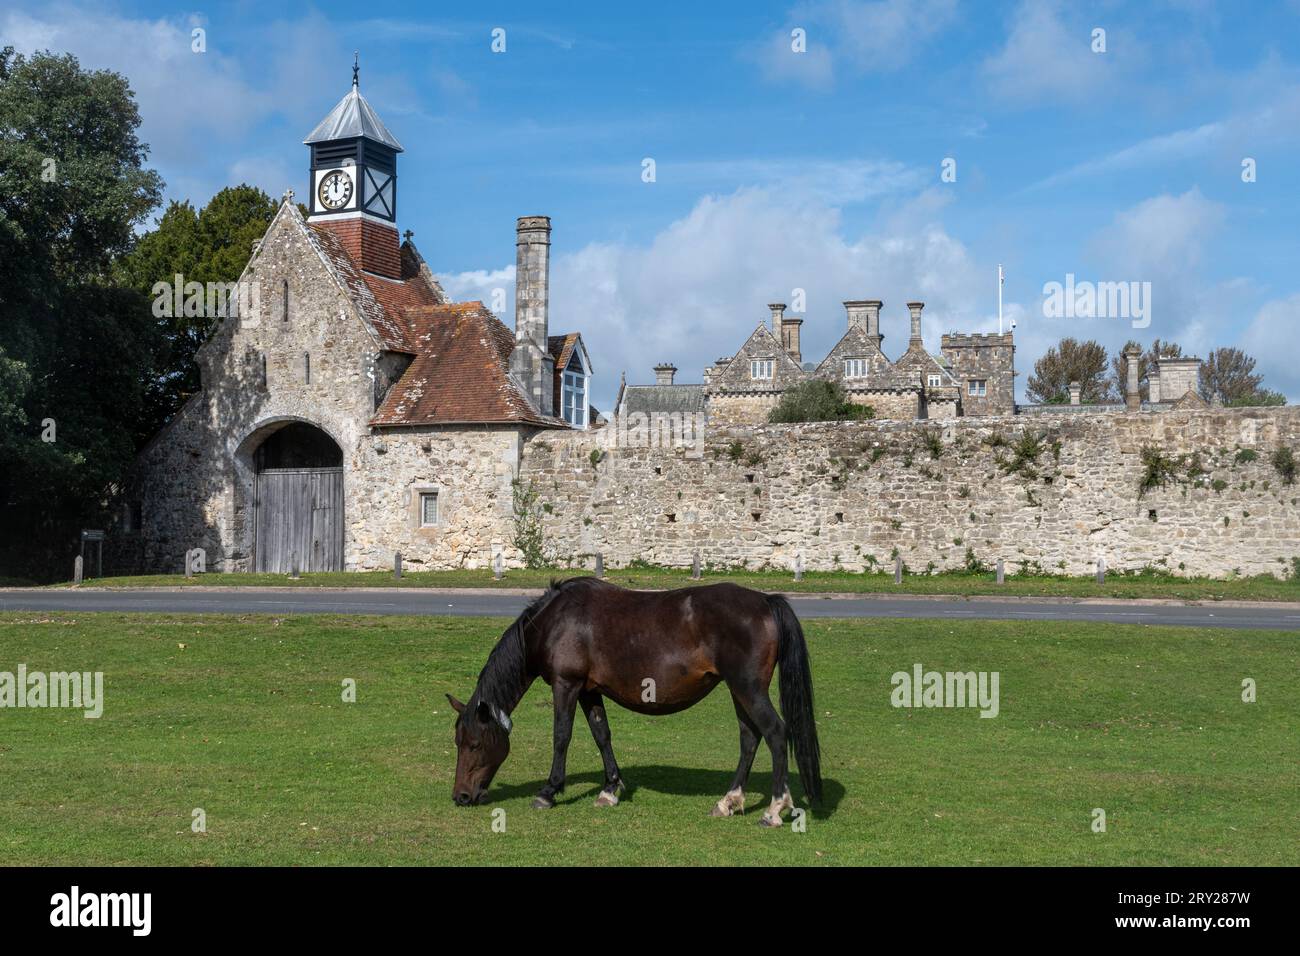 New Forest ponies on the village green in front of Beaulieu Abbey Outer Gatehouse, Beaulieu, Hampshire, England, UK Stock Photo